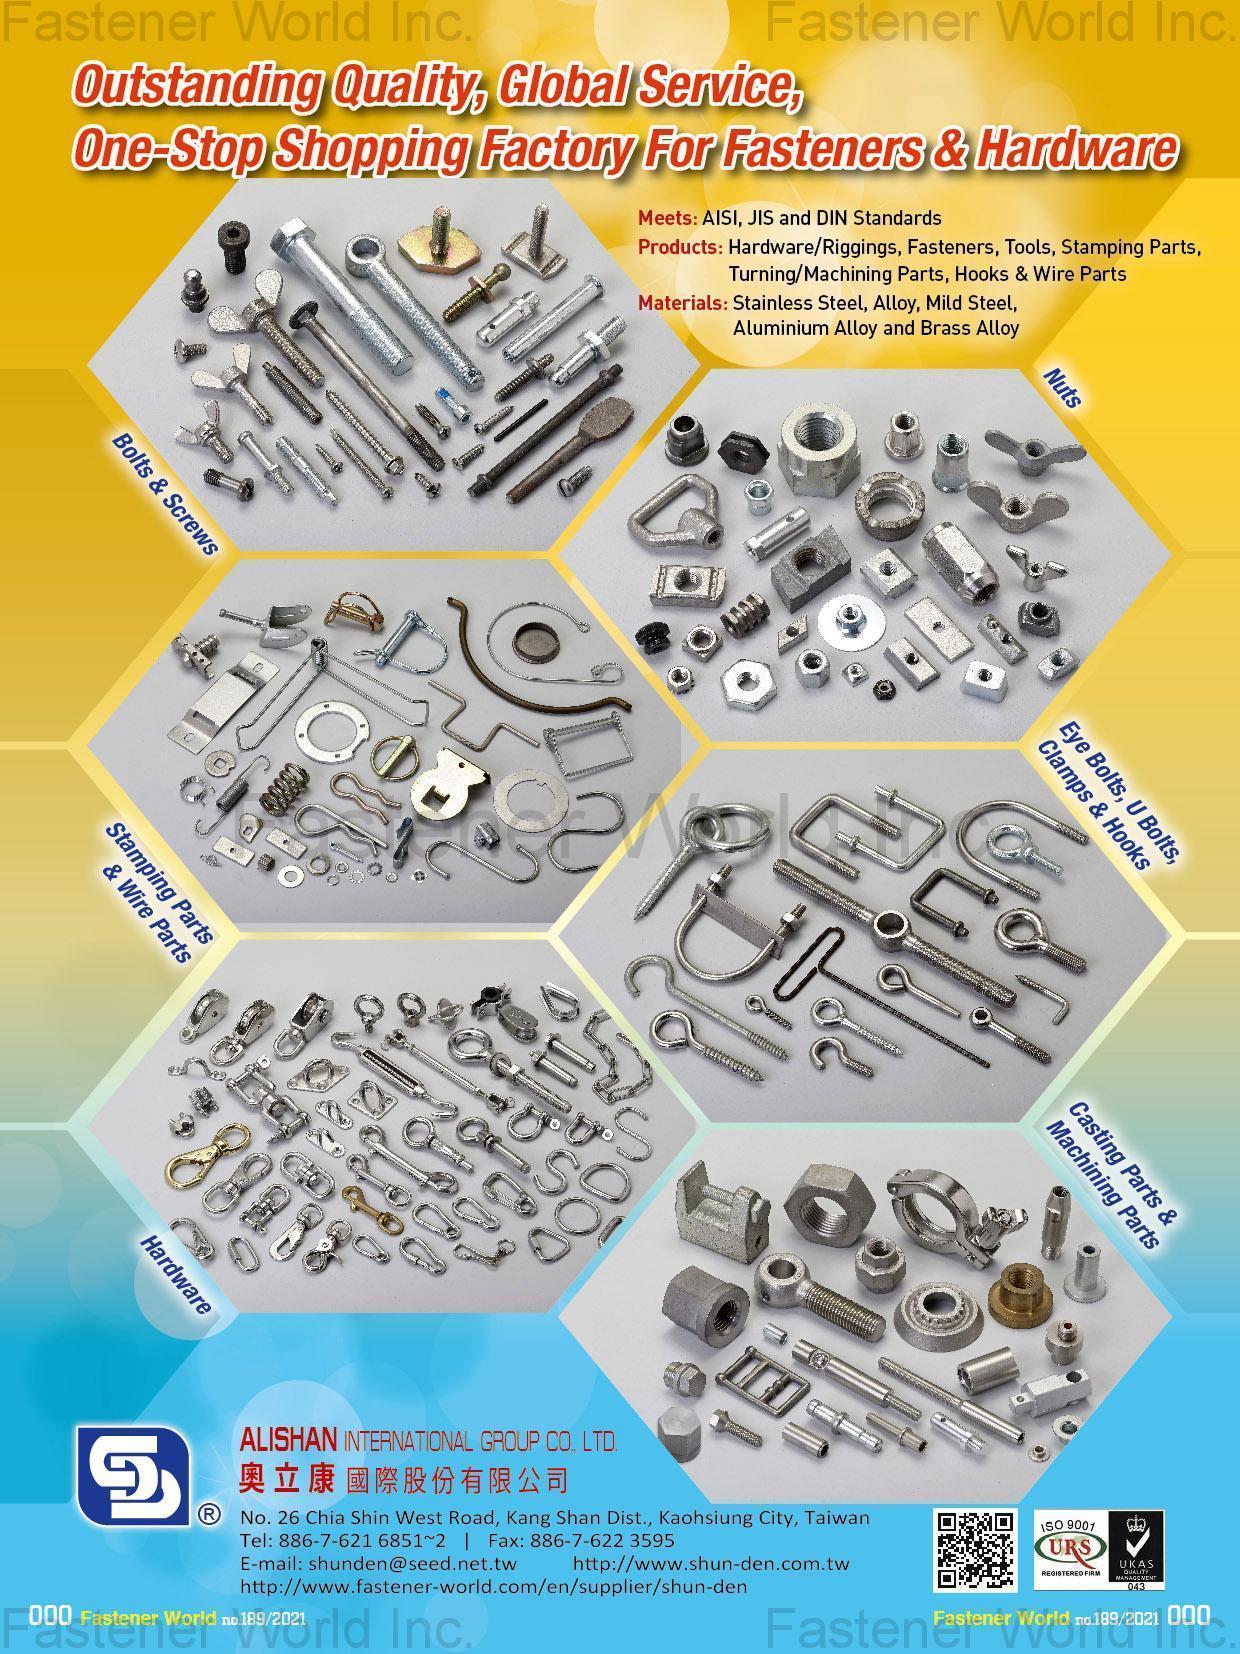 All Kinds of Screws,Stamped Parts,Hardwares,All Kinds Of Nuts,Eye Bolts,U Bolts,Hooks,Machine Parts